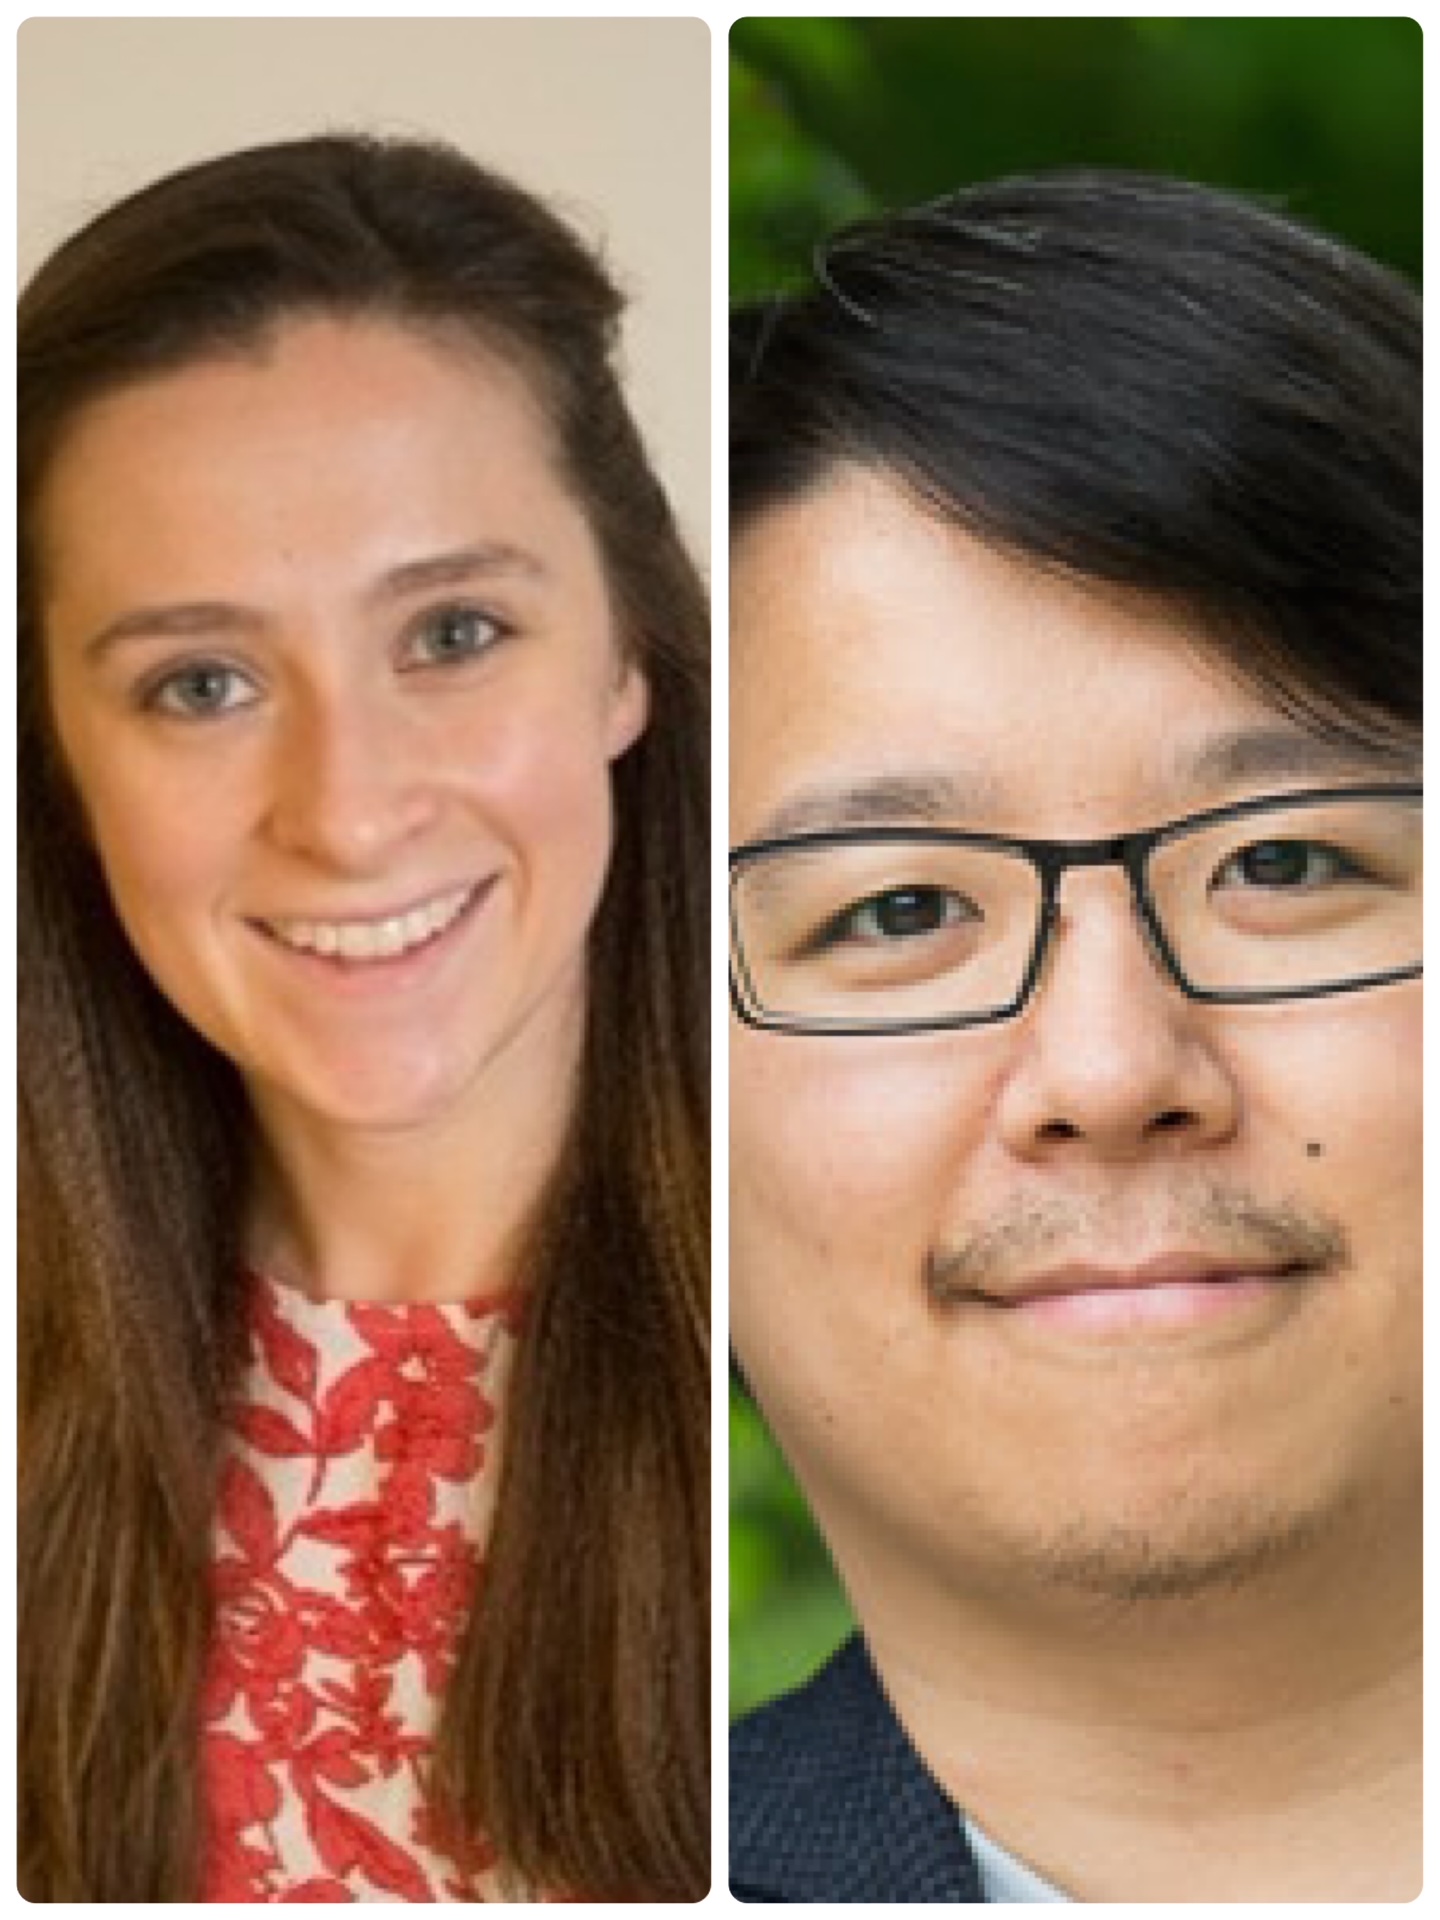 NEWS – Dr. Kari Sahan (Lecturer in Second Language Education, University of Reading) and Dr. Billy Wong (Associate Professor in Widening Participation, University of Reading) win the 2022 Institute of Education’s Research Output Awards